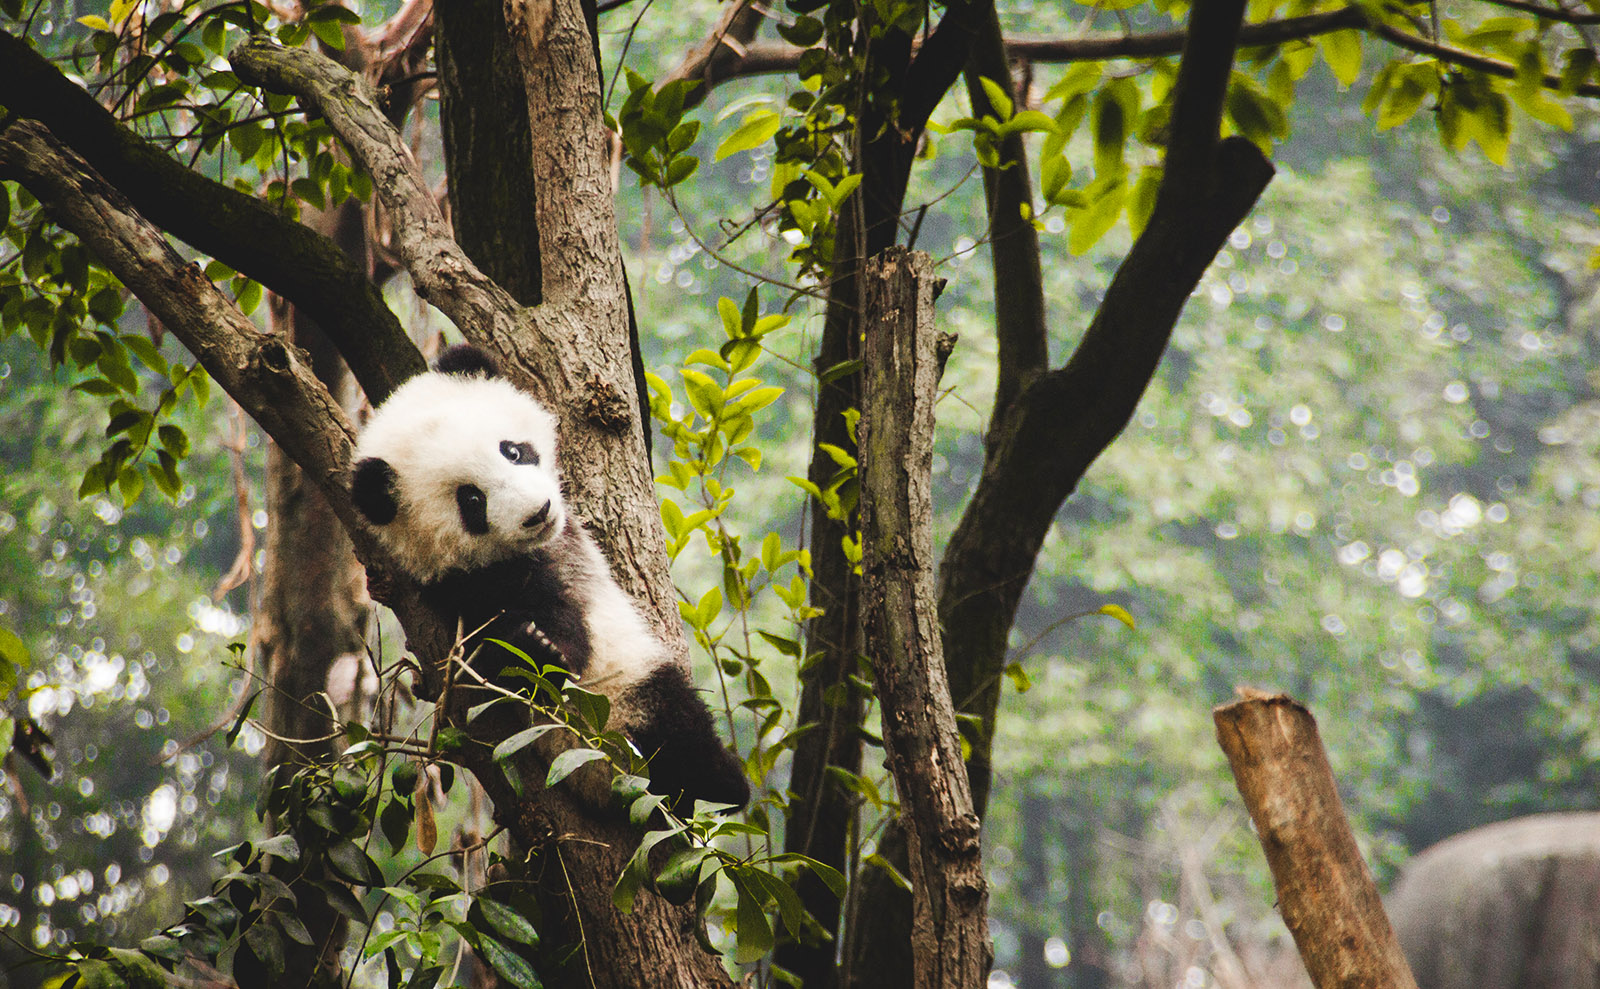 Giant Pandas, Why Read Fiction, Earl Grey, Magical Treehouses & More: Endnotes 13 March